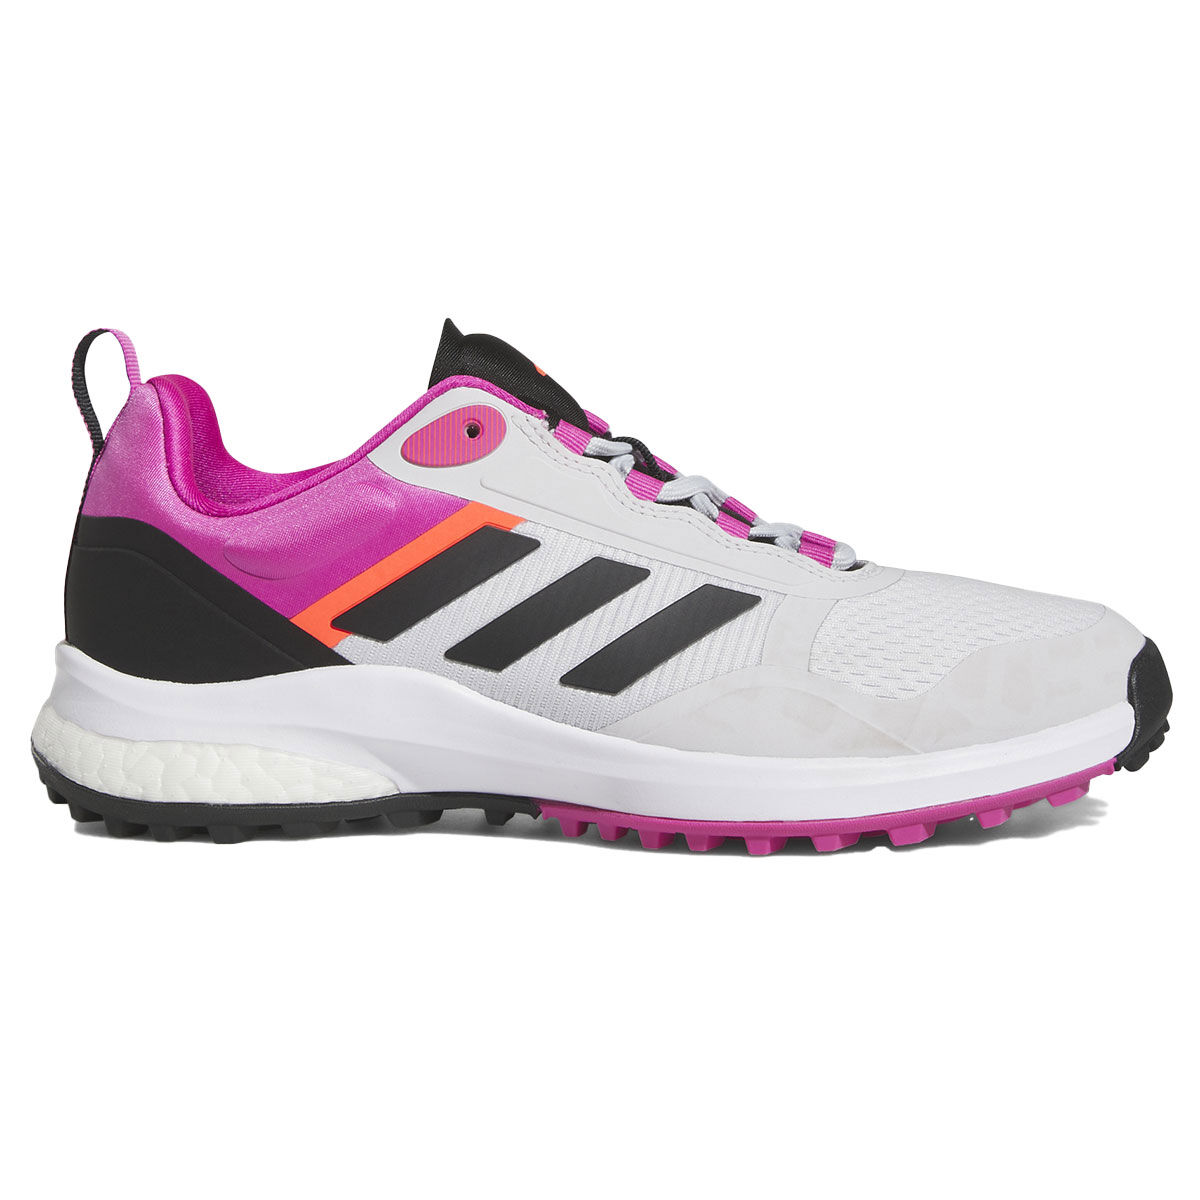 adidas Golf Women’s Grey, Black and Pink Striped Zoysia Spikeless Golf Shoes, Size: 5 | American Golf